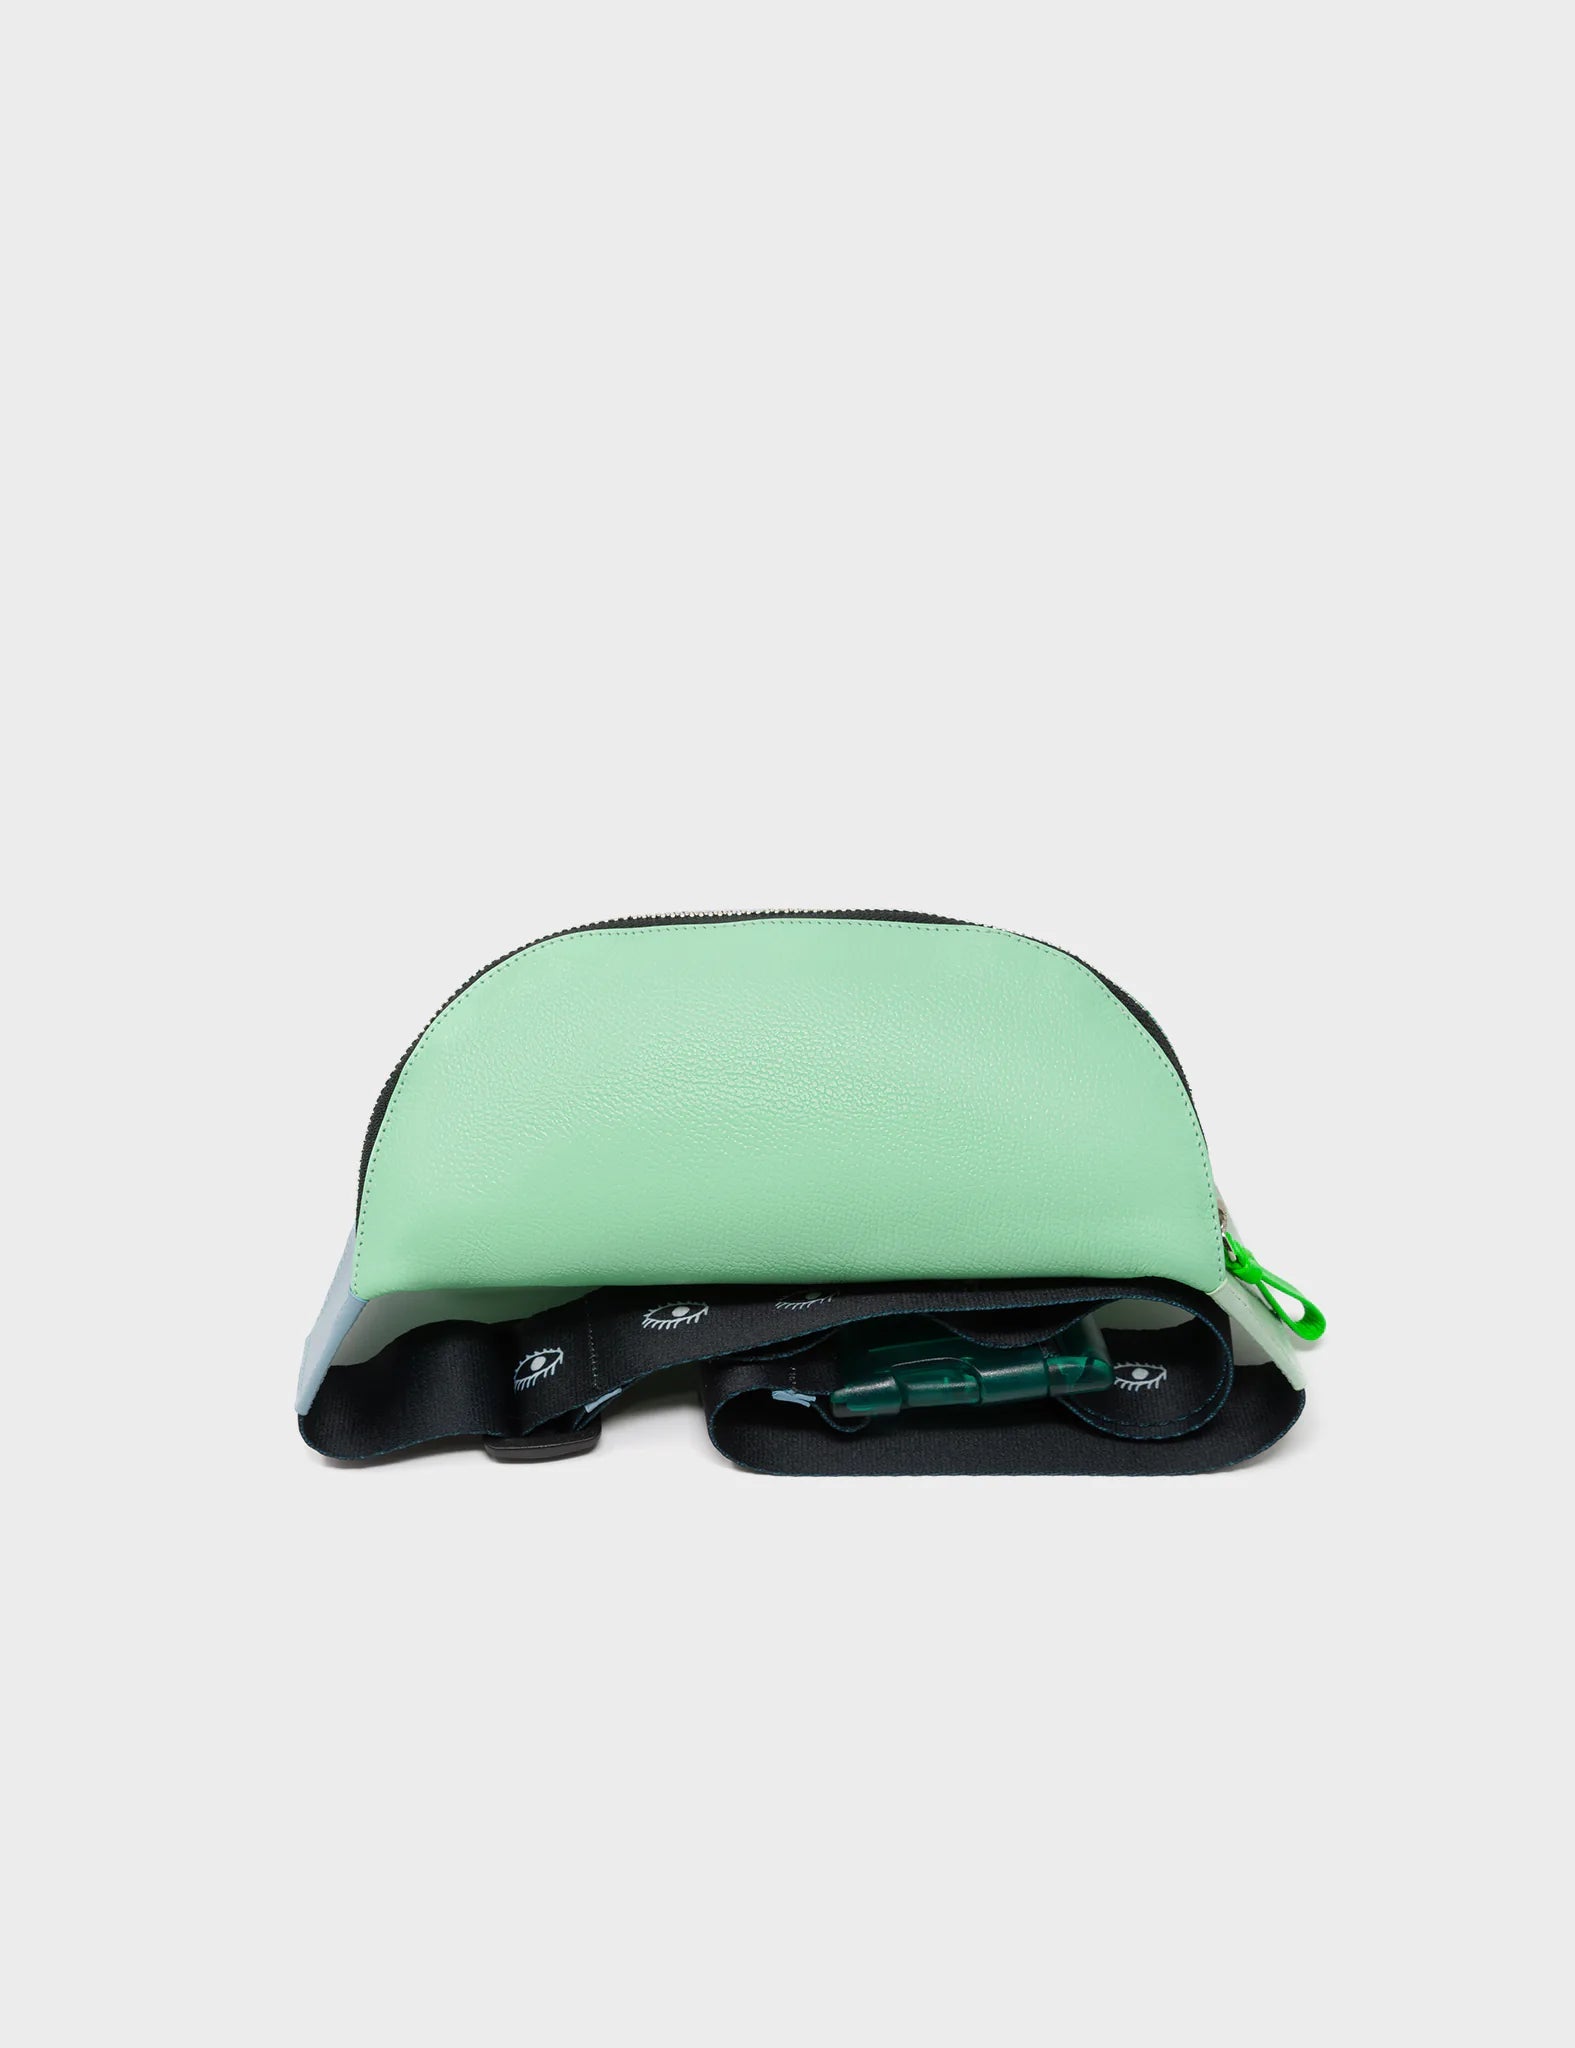 Harold Fanny Pack Green and Blue Leather - Eyes Embroidery - Top